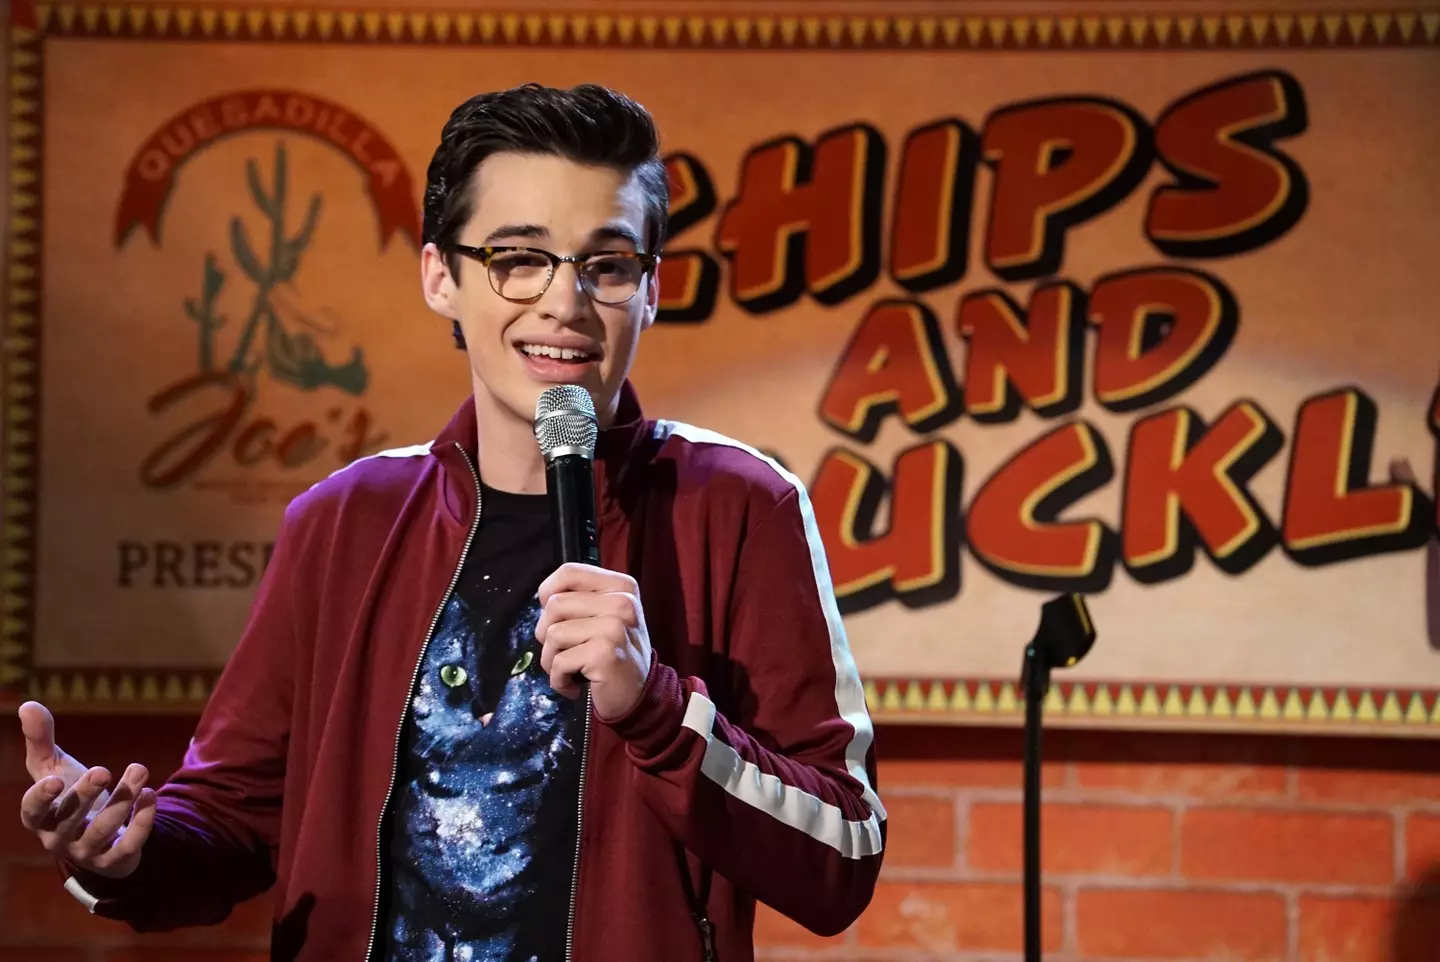 Joey Bragg during his time working for the Disney Channel.